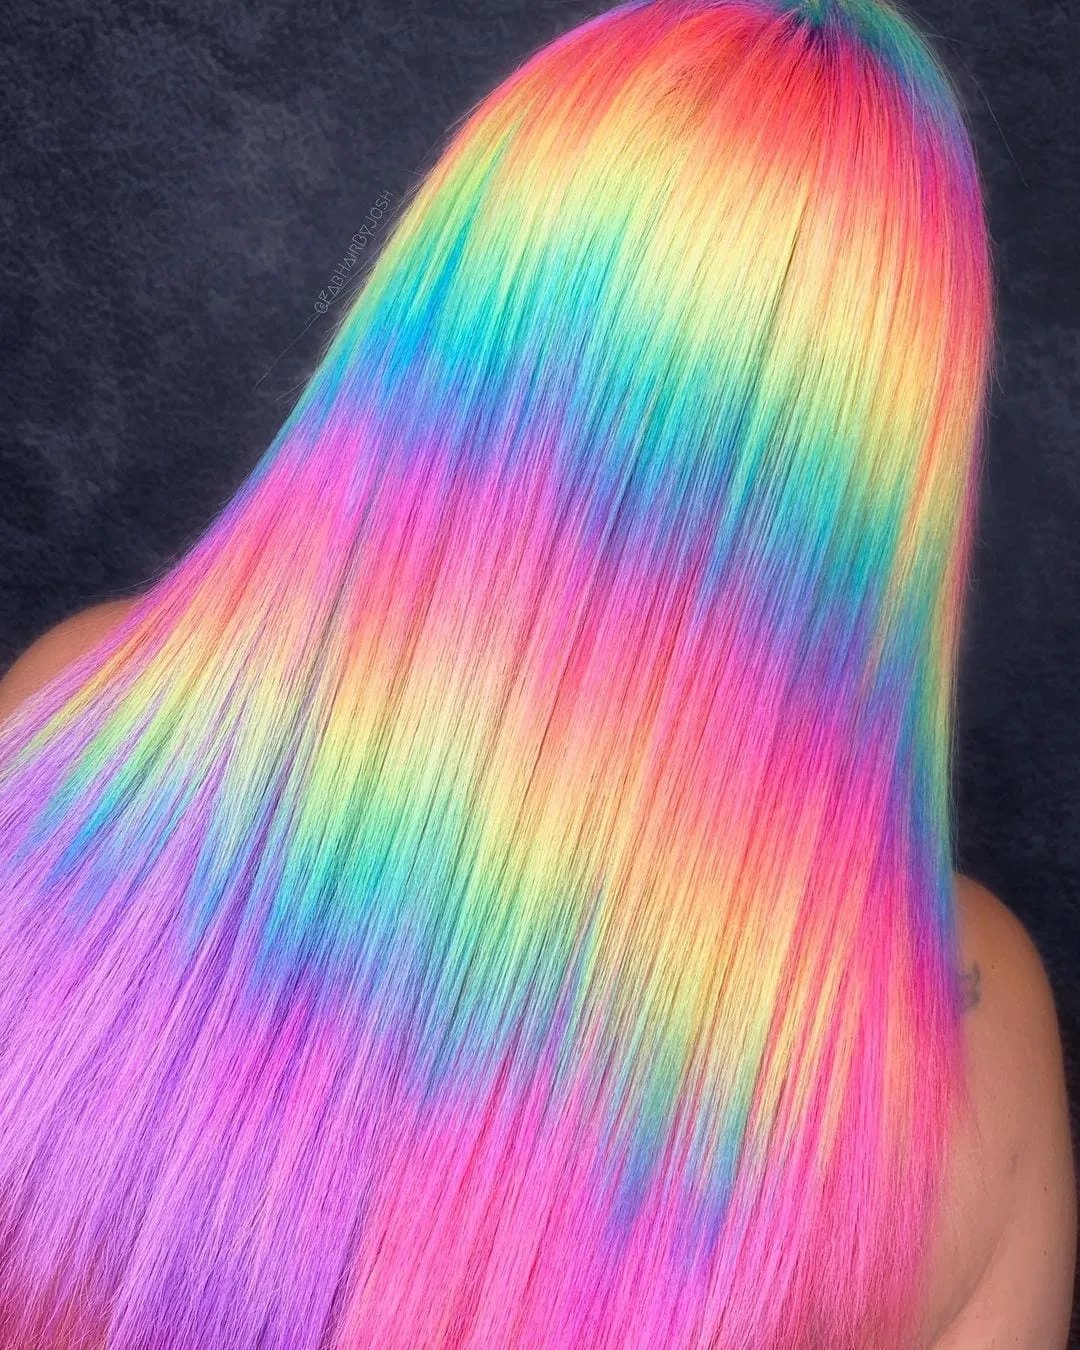 Holographic waves hairstyle on woman in a sleeveless shirt looking away from the camera